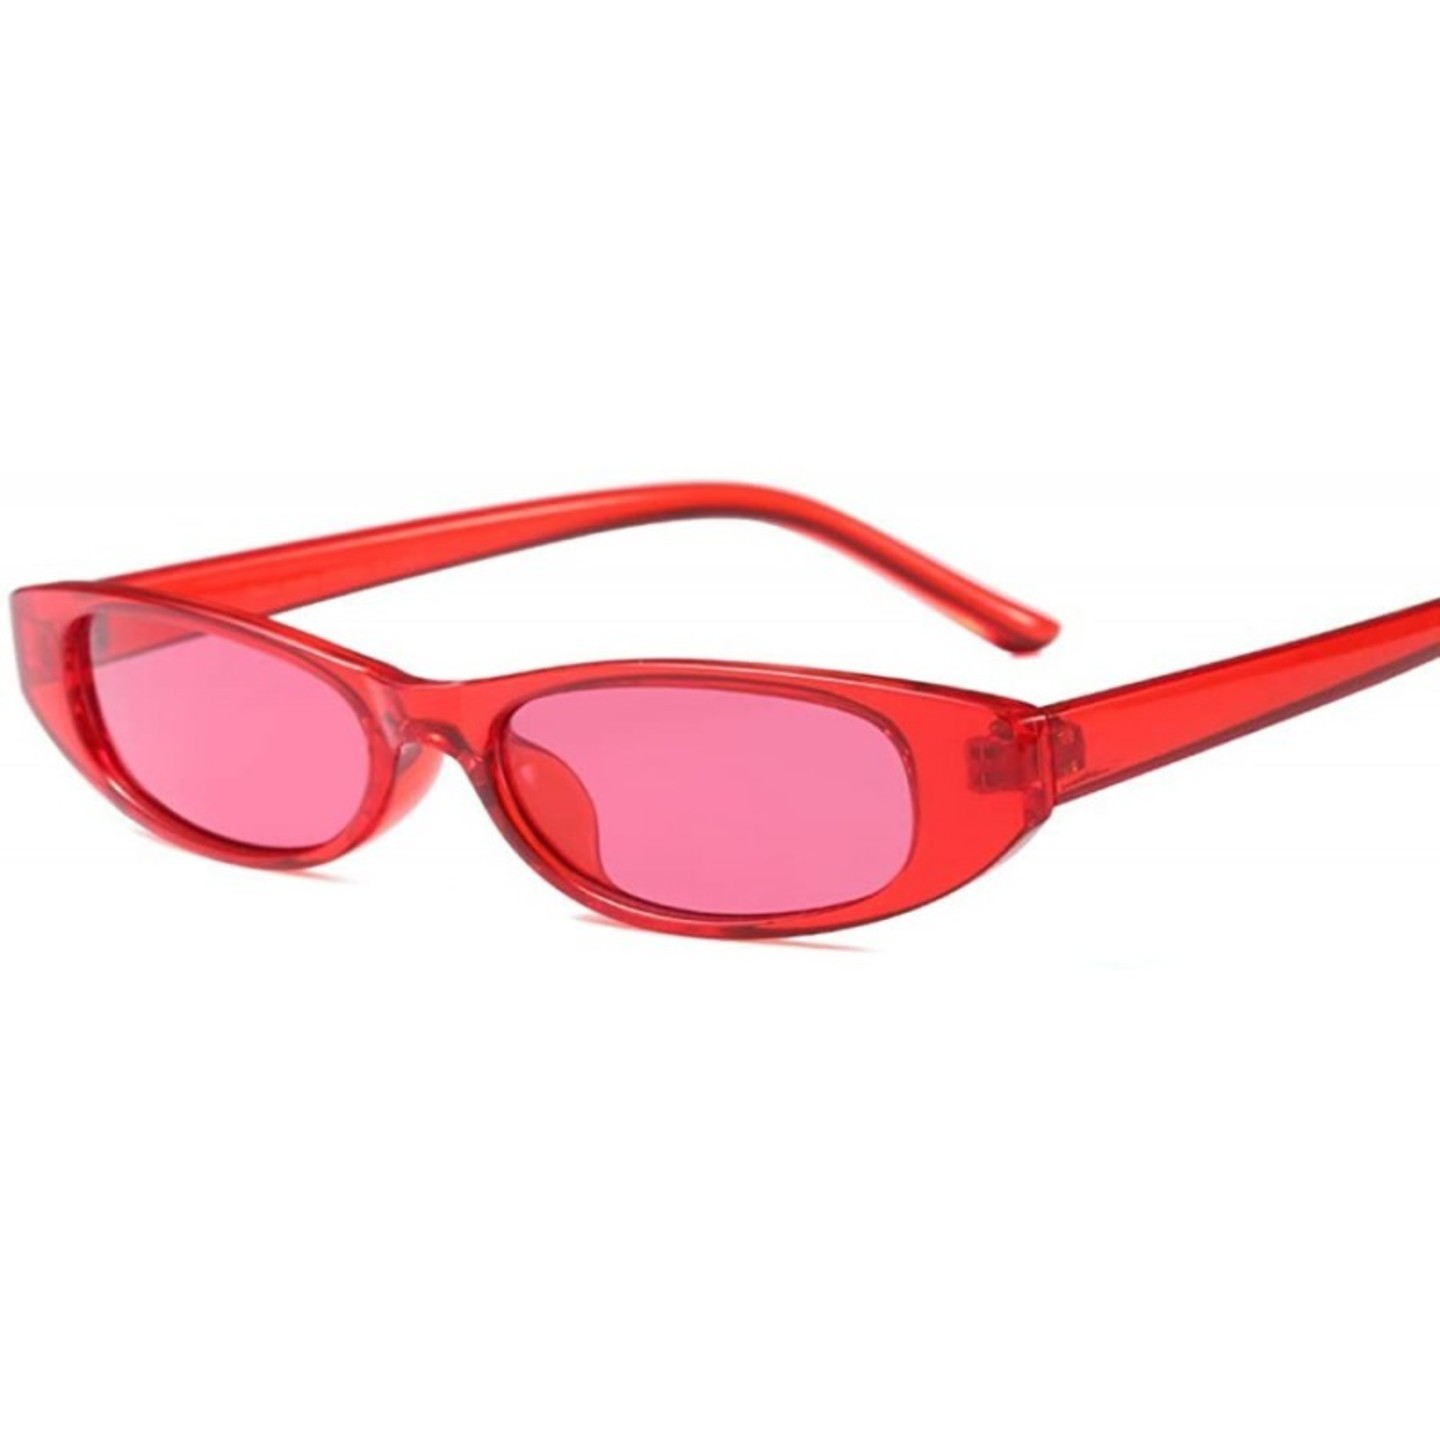 Full Rim Red Colored Sunglasses  Limited Addition